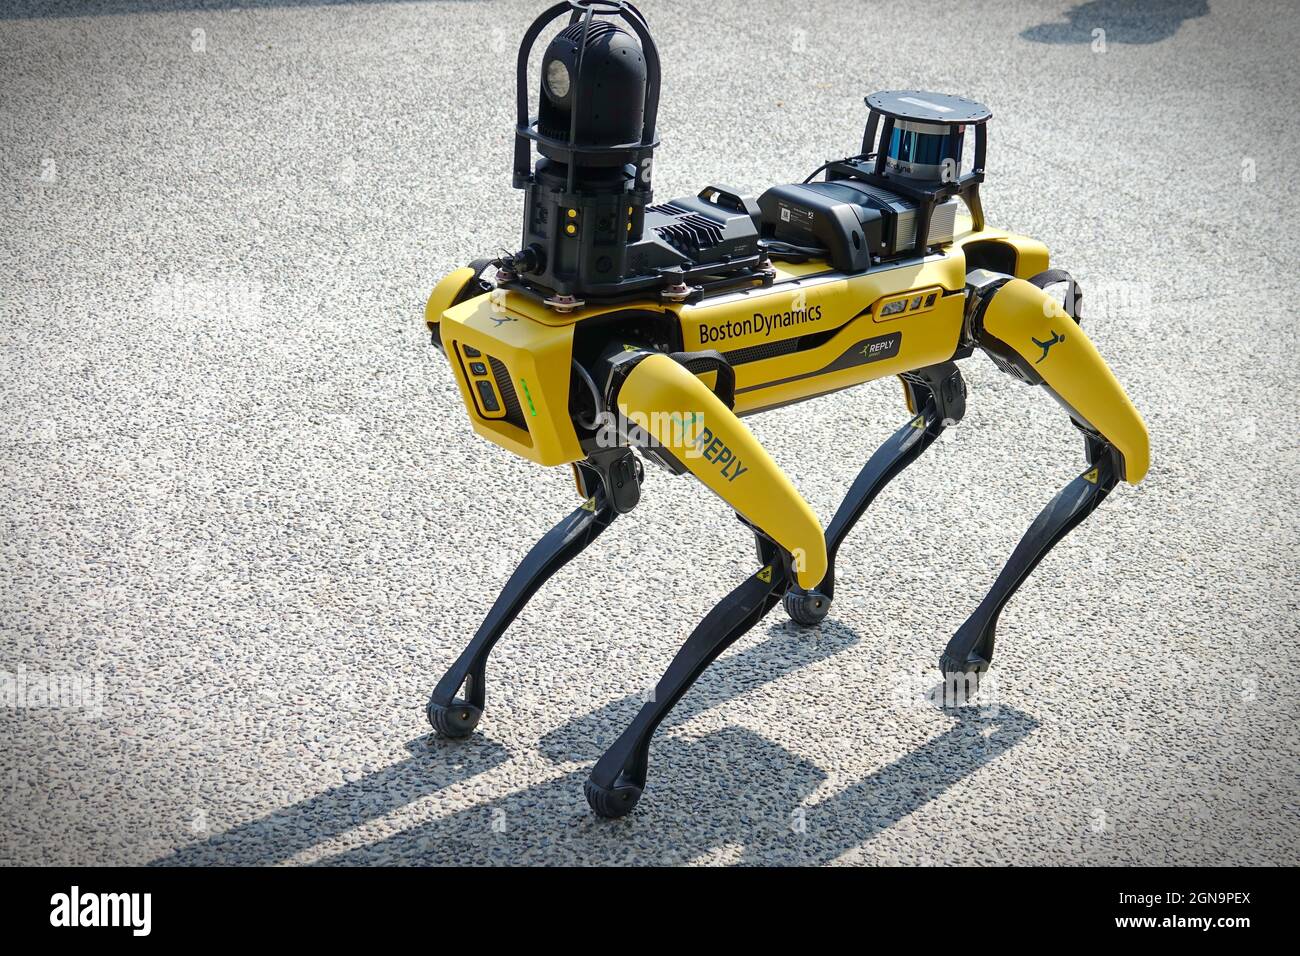 Yellow robot dog, suitable for industrial detection and remote operation. Mini robot guard Spot. Turin, Italy - September 2021 Stock Photo